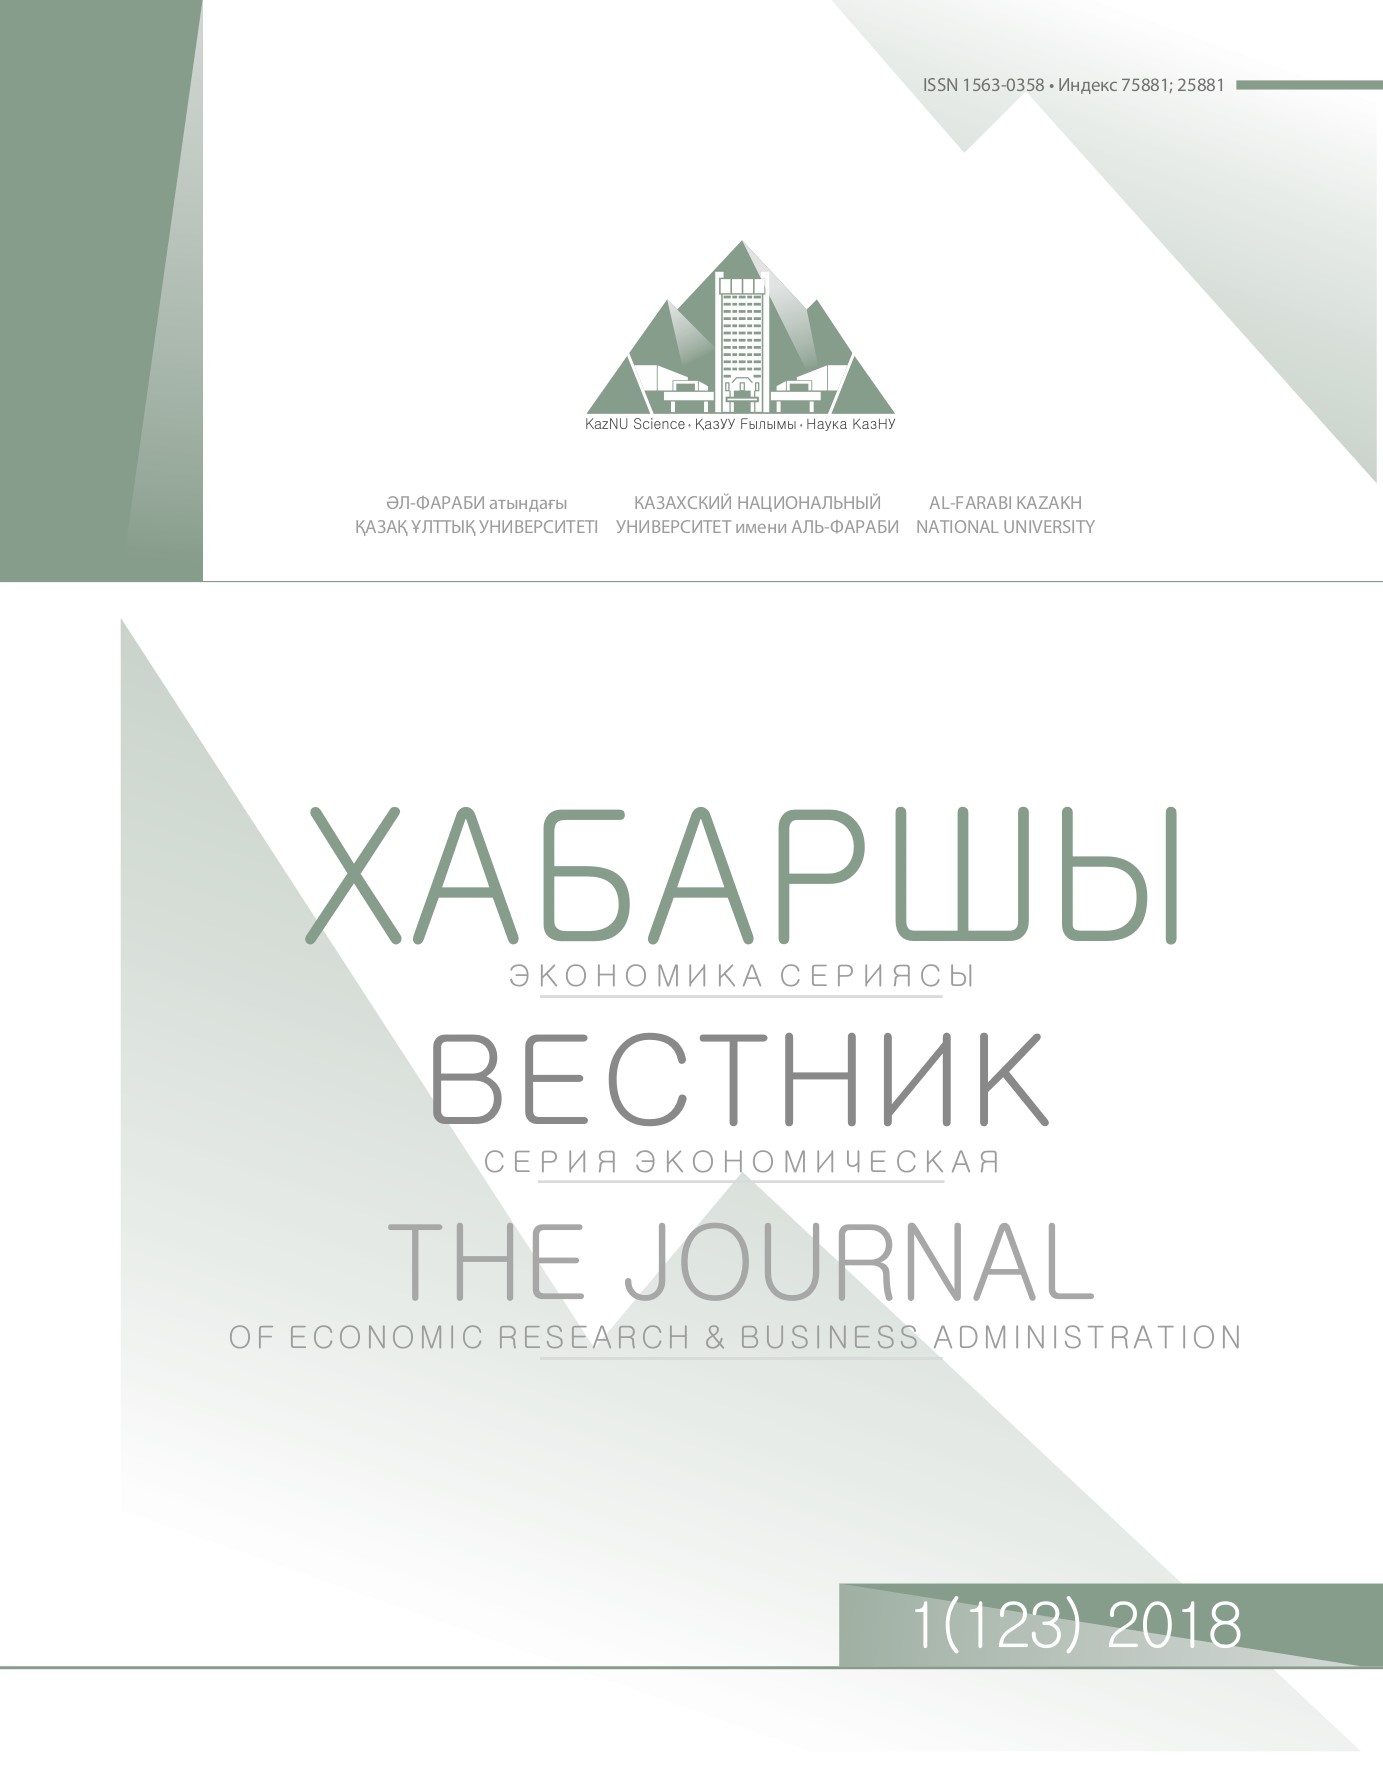 					View Vol. 123 No. 1 (2018): The Journal of Economic Research & Business Administration
				